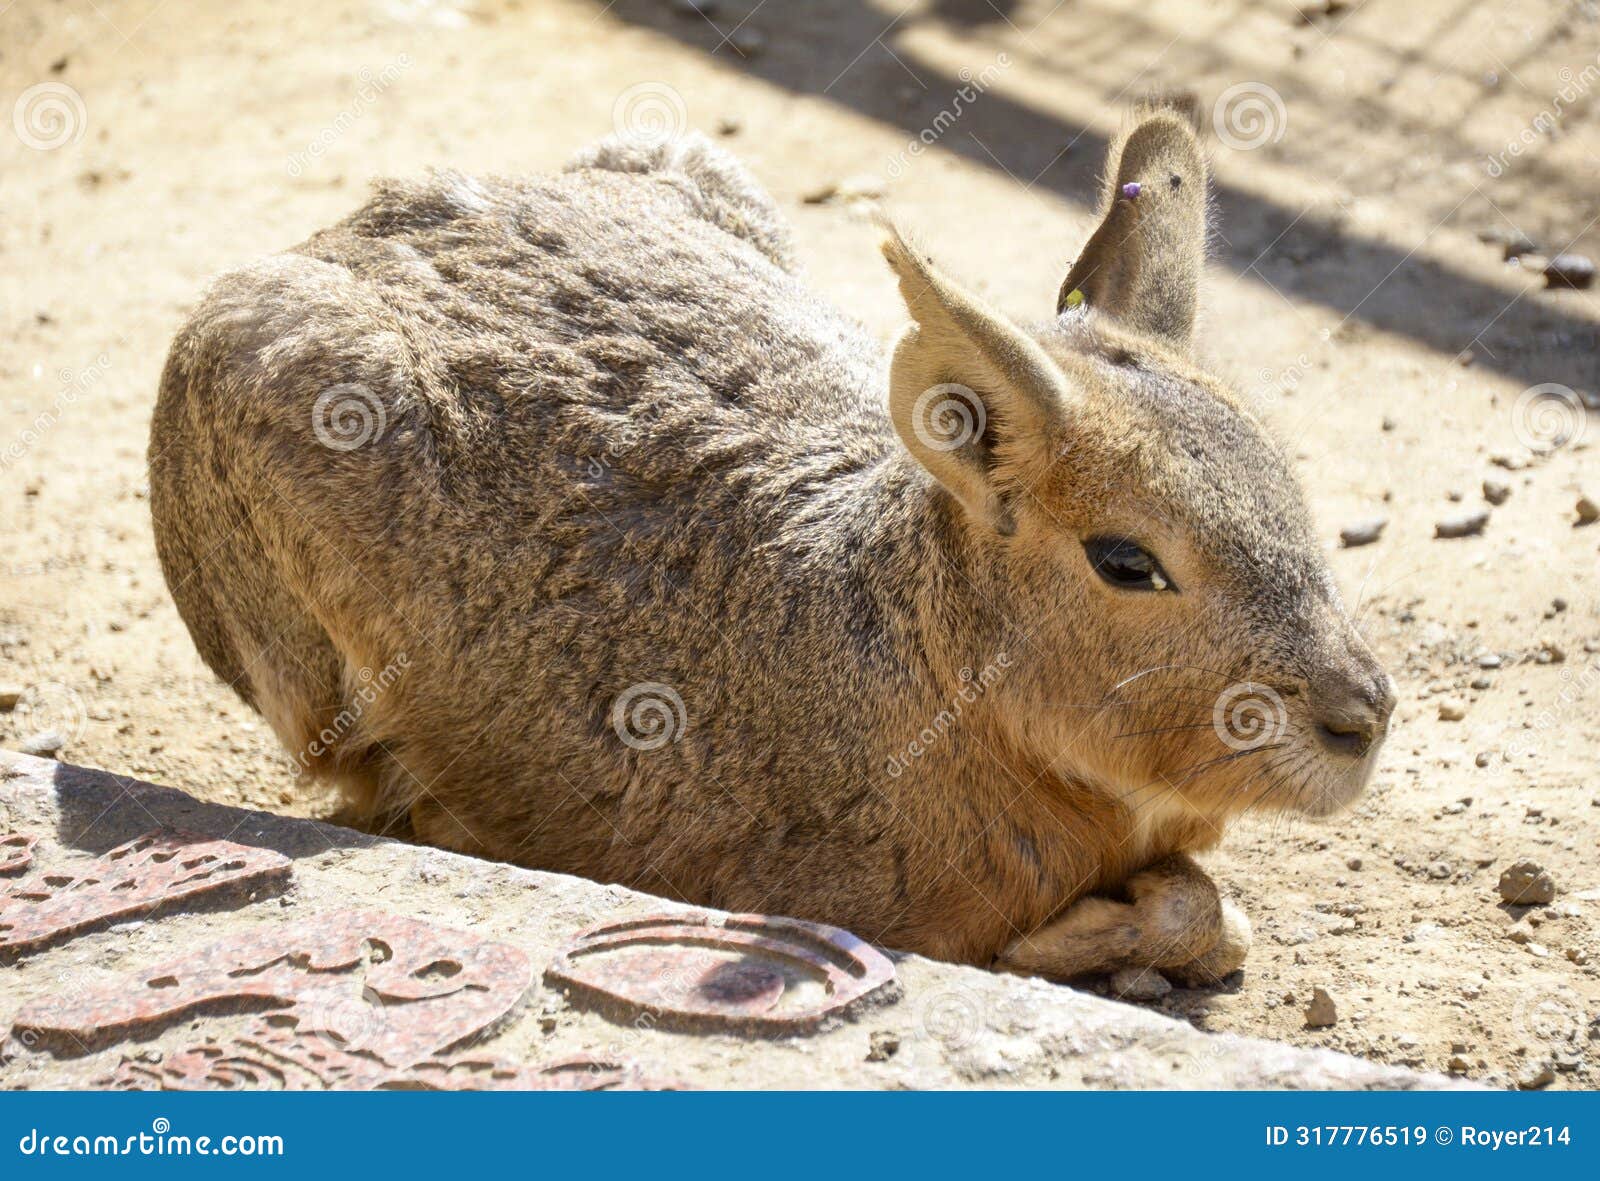 patagonian cavy